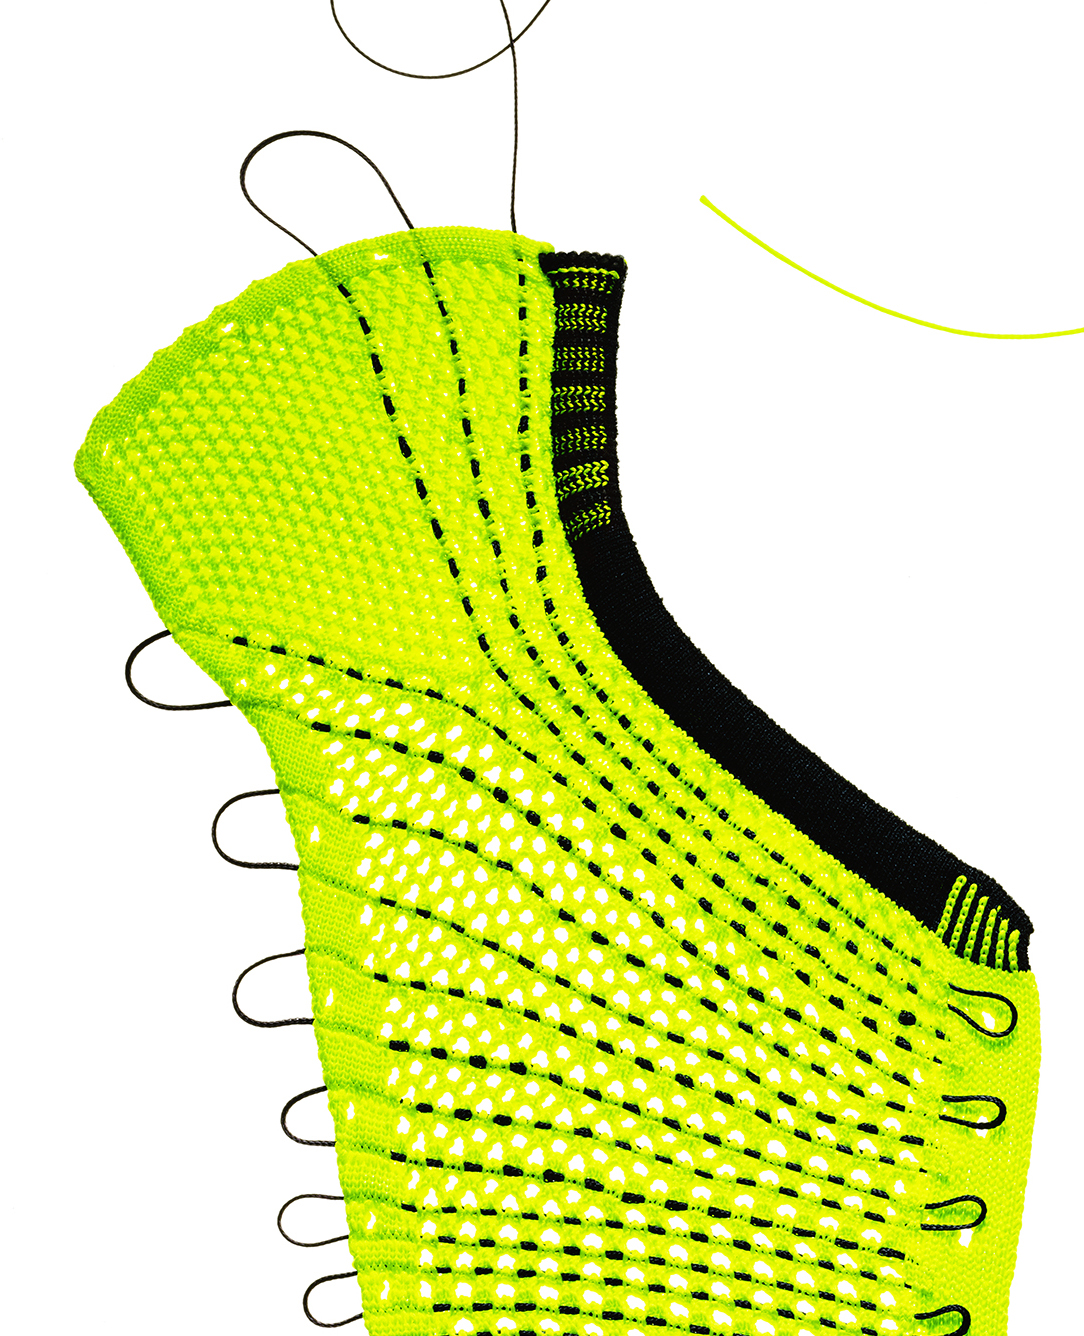 Flyknit distance track spike unveiled